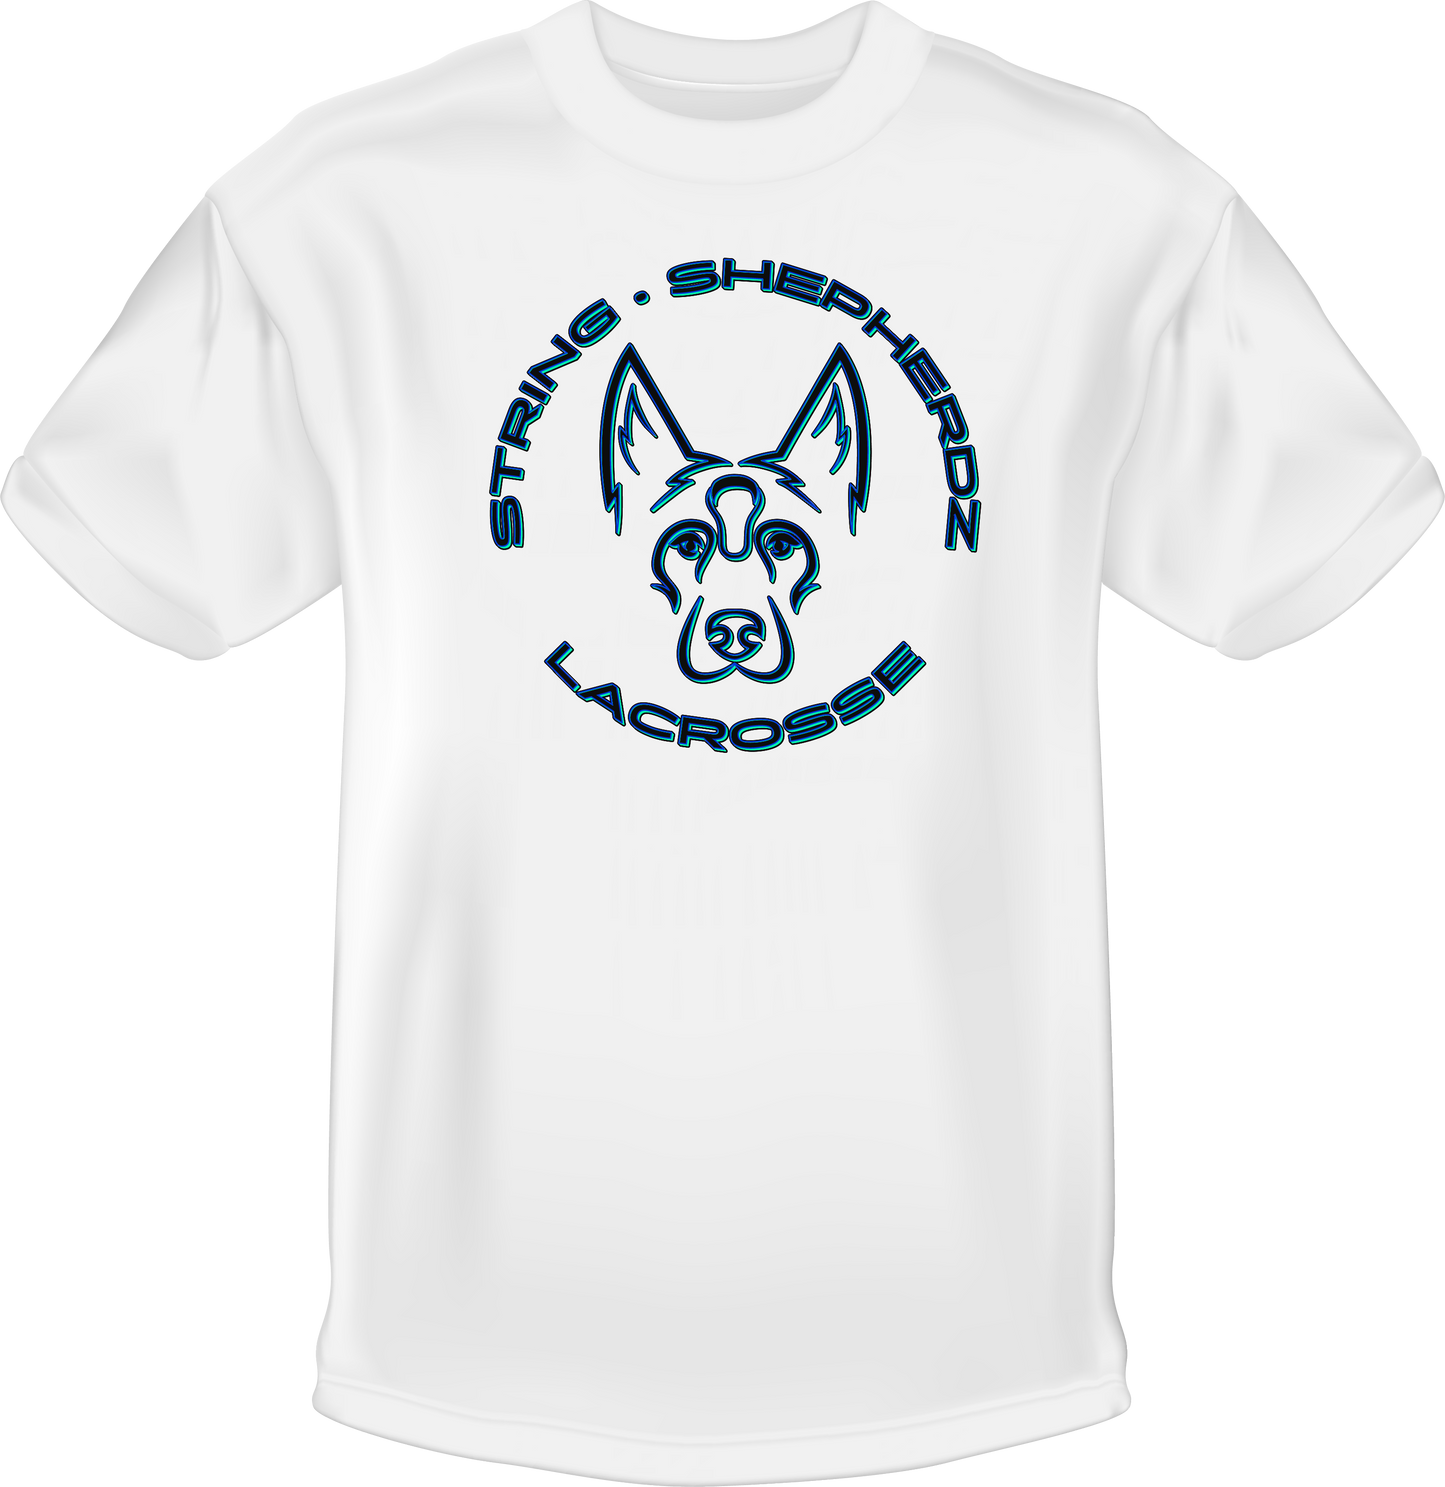 SPARTY LOGO PERFORMANCE T